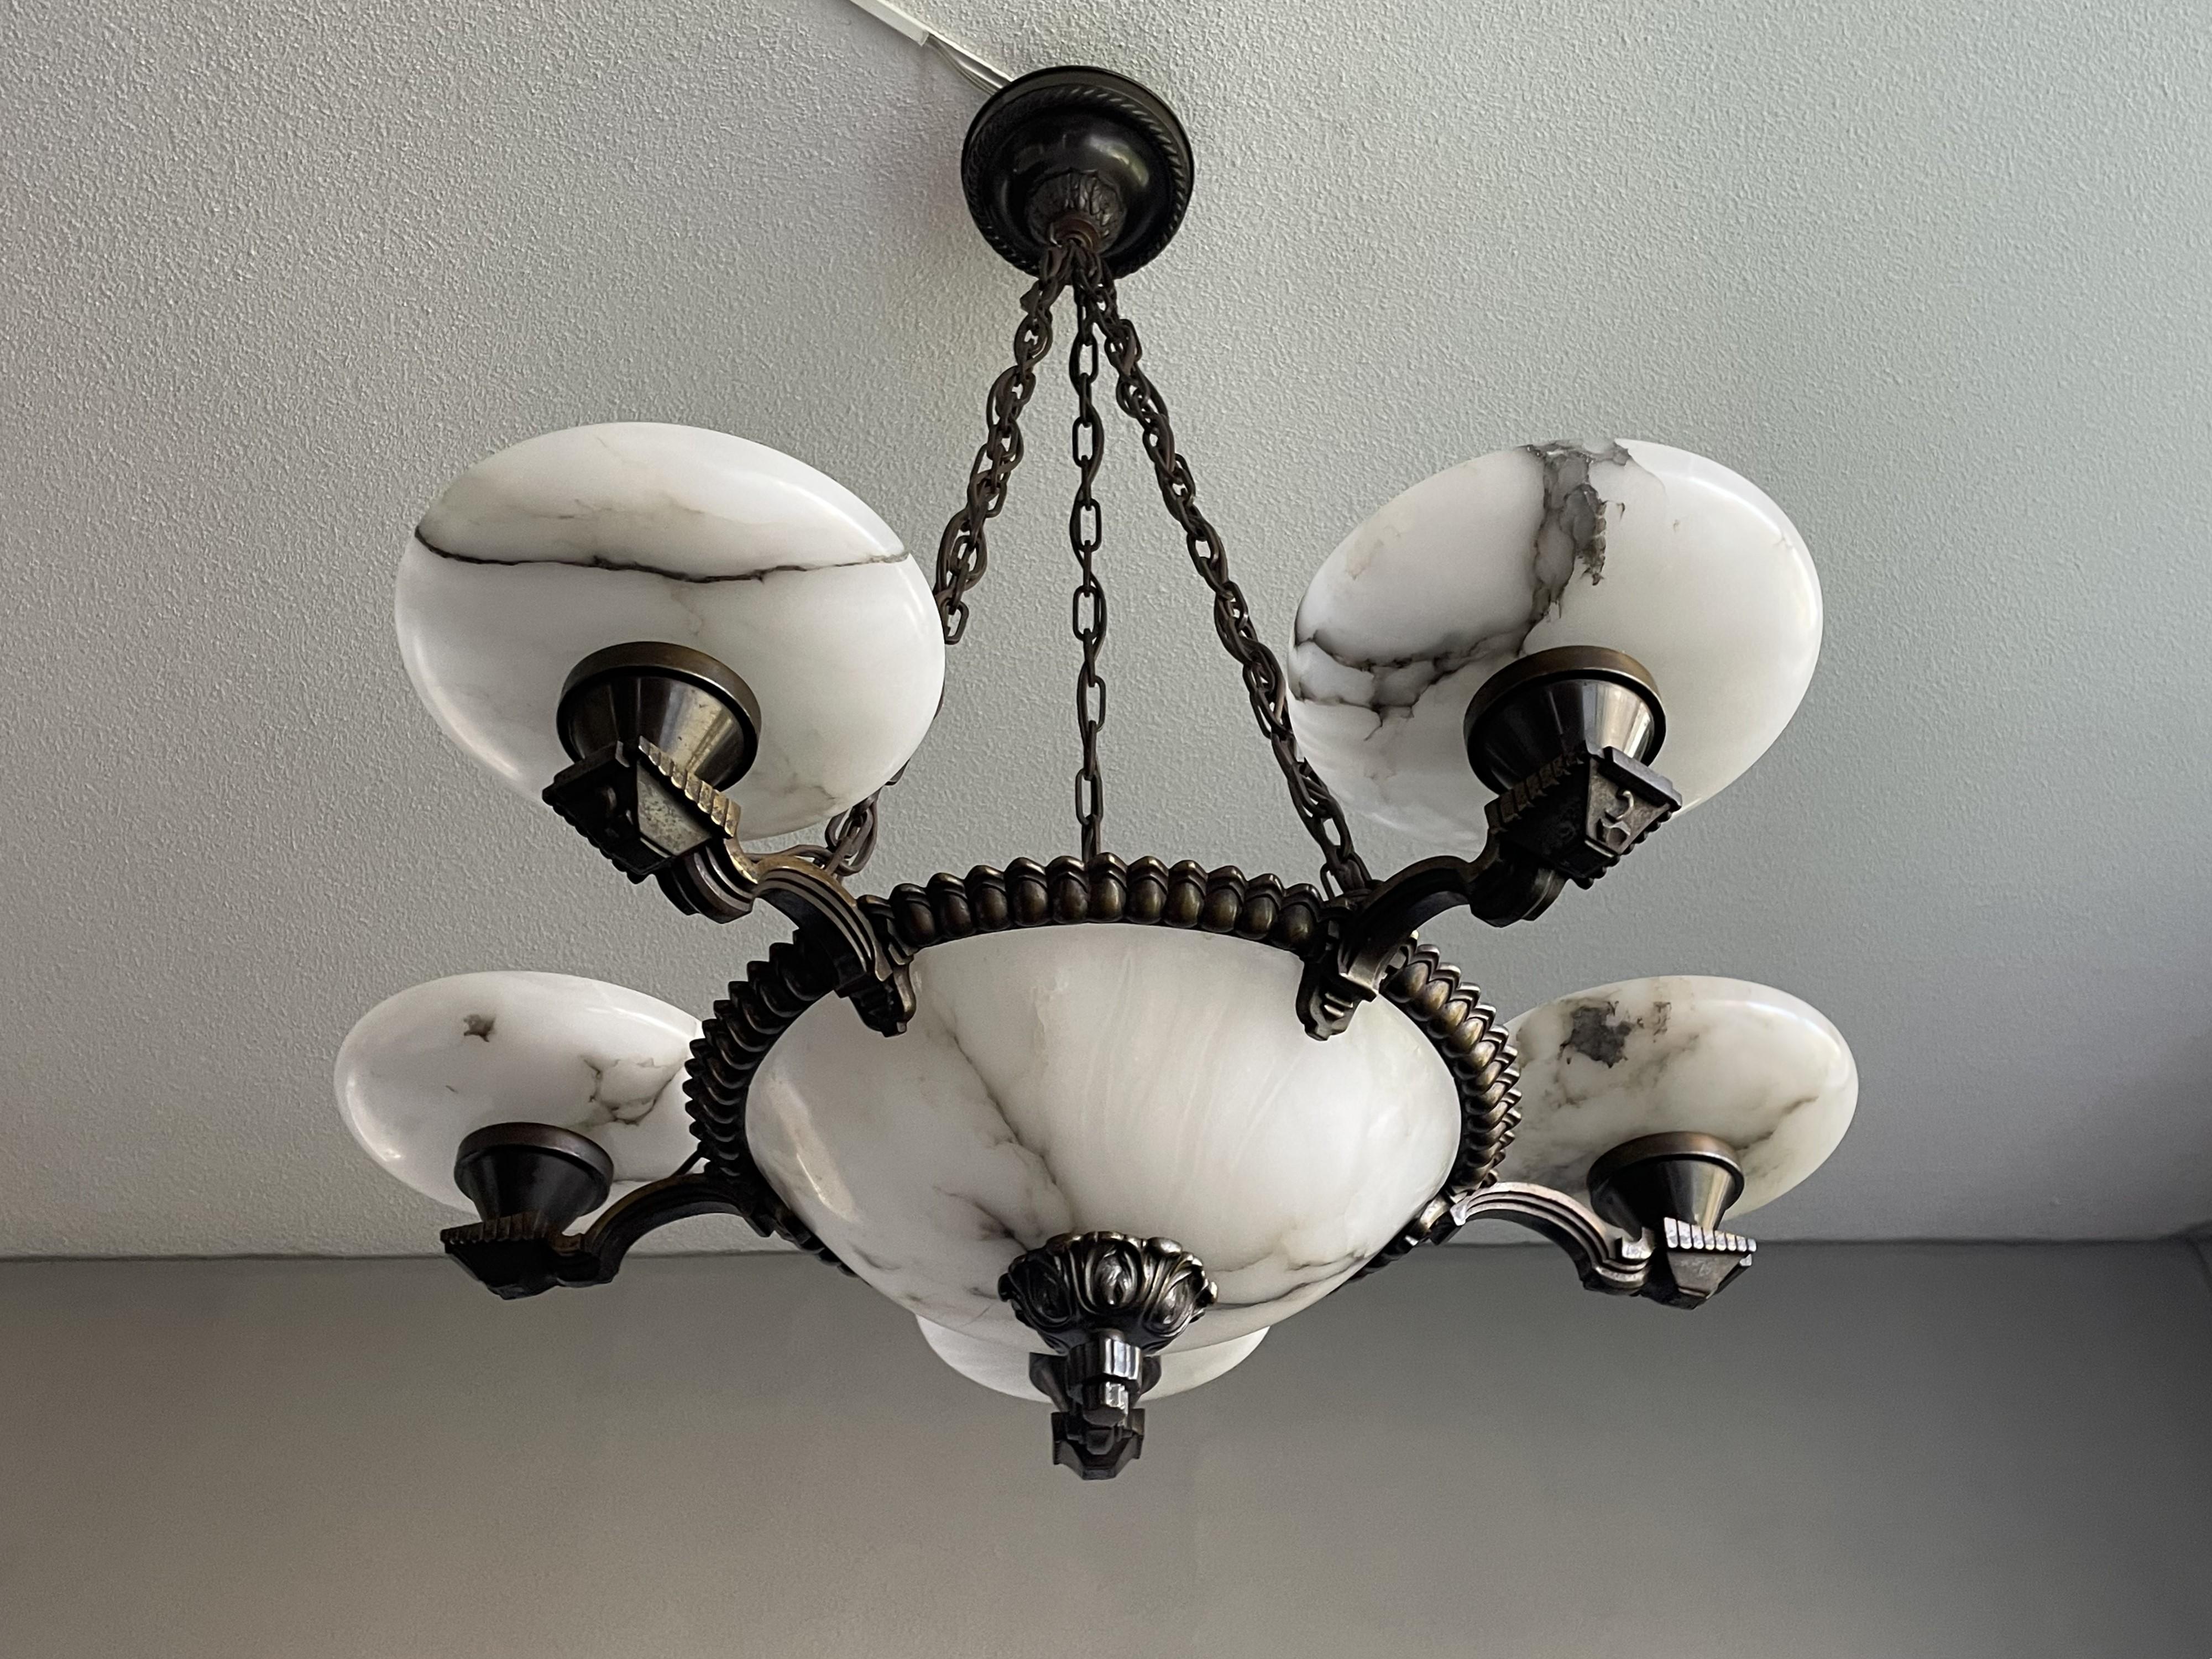 Striking and practical size alabaster pendant light for the perfect atmosphere.

If you are looking for a stylish and ready to use chandelier to grace your living space then this antique Art Deco specimen from the earliest years of the 20th century